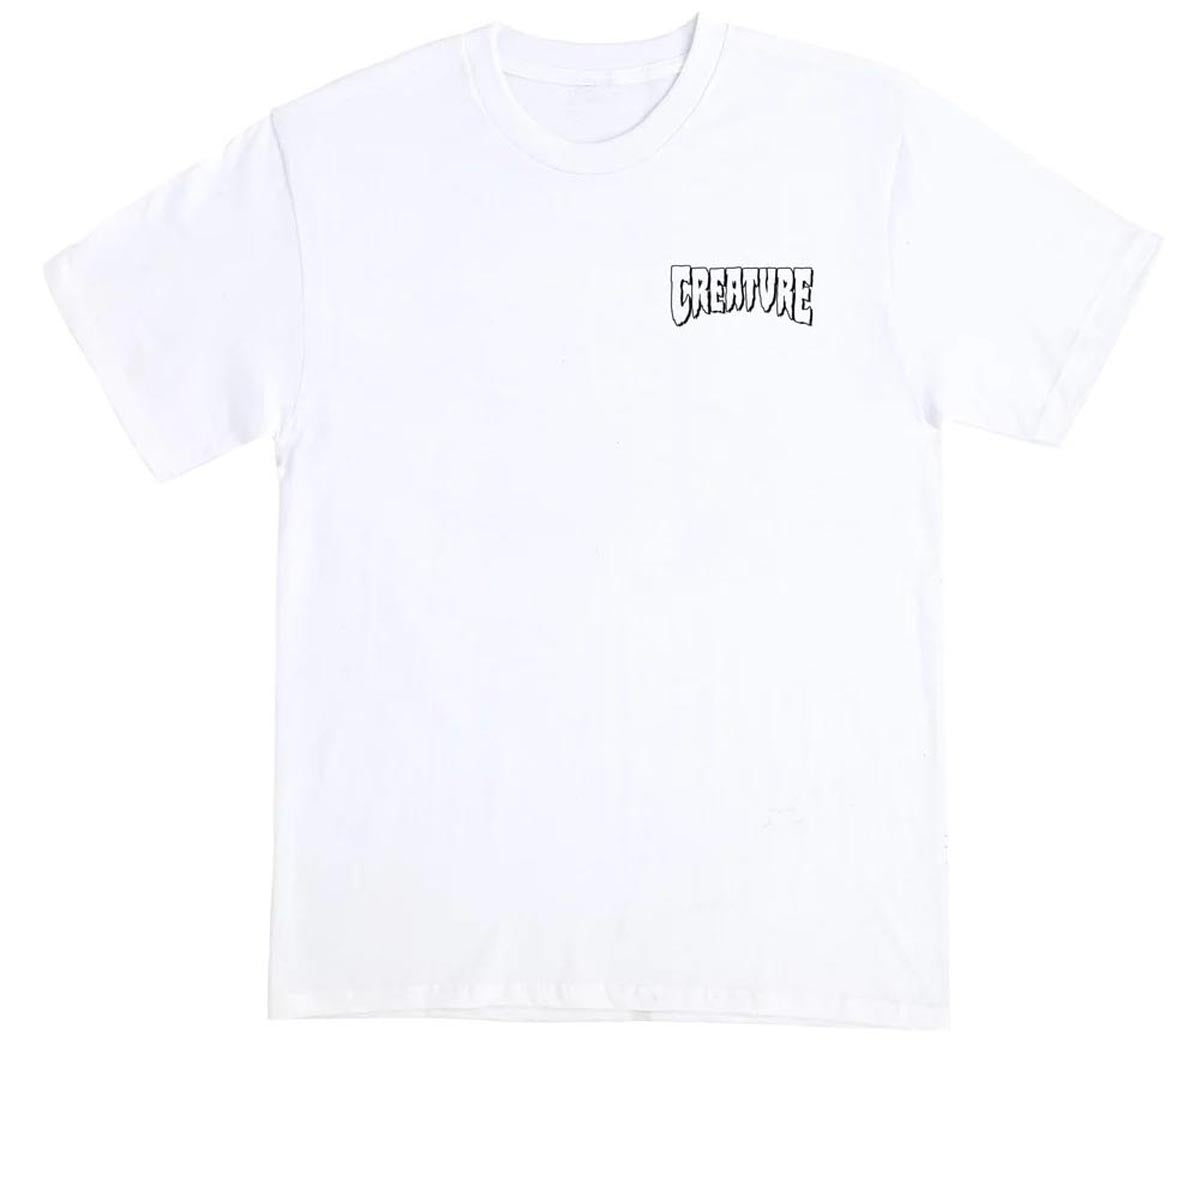 Creature Forever Undead Relic T-Shirt - White image 2